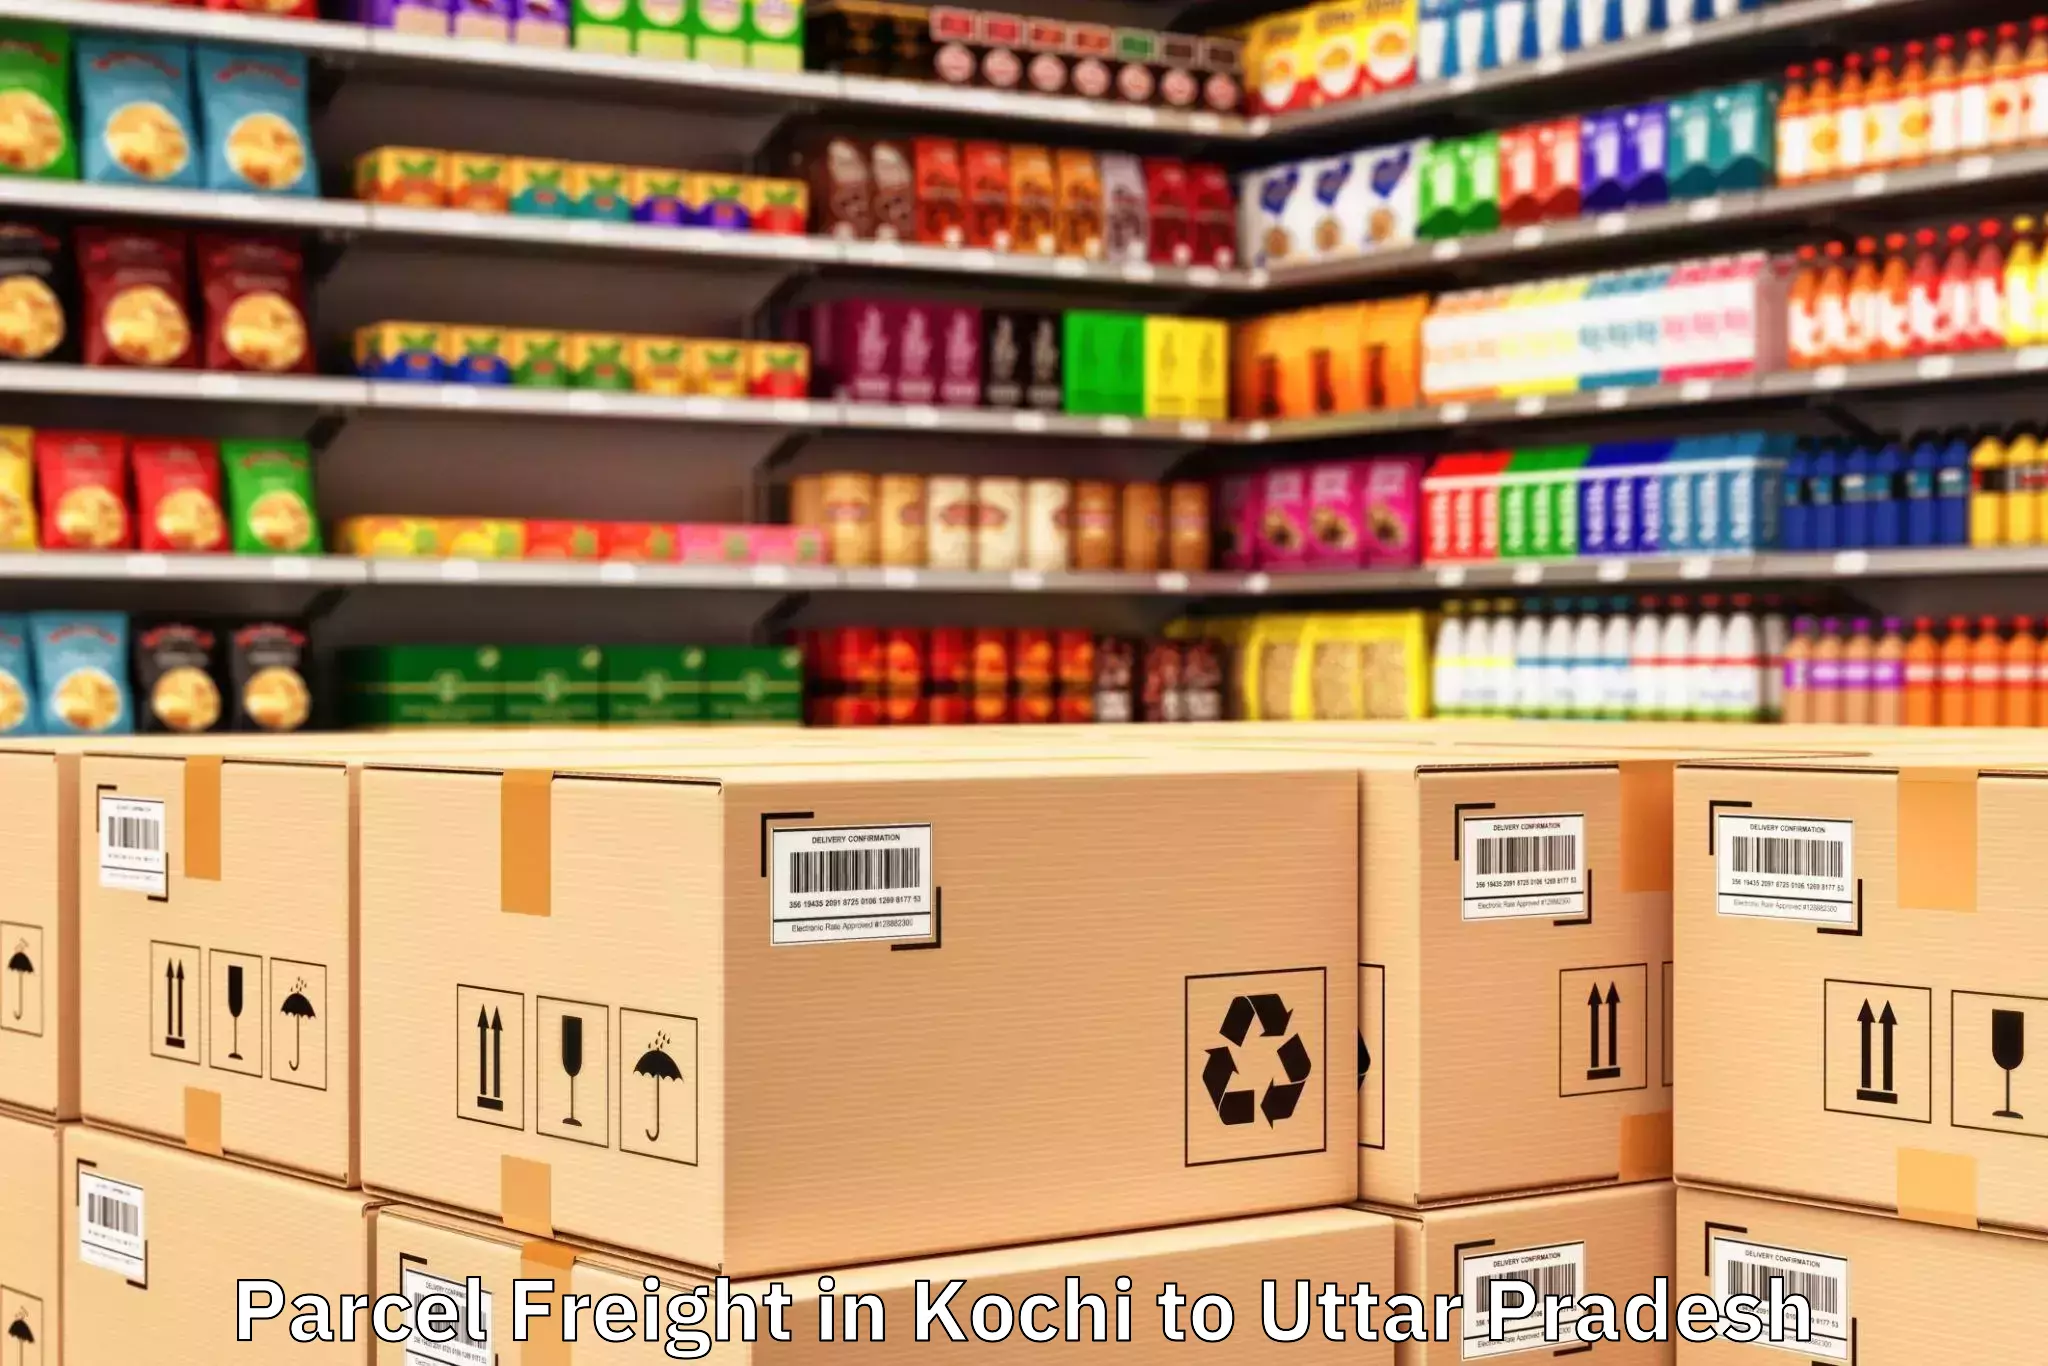 Easy Kochi to Iiit Lucknow Parcel Freight Booking